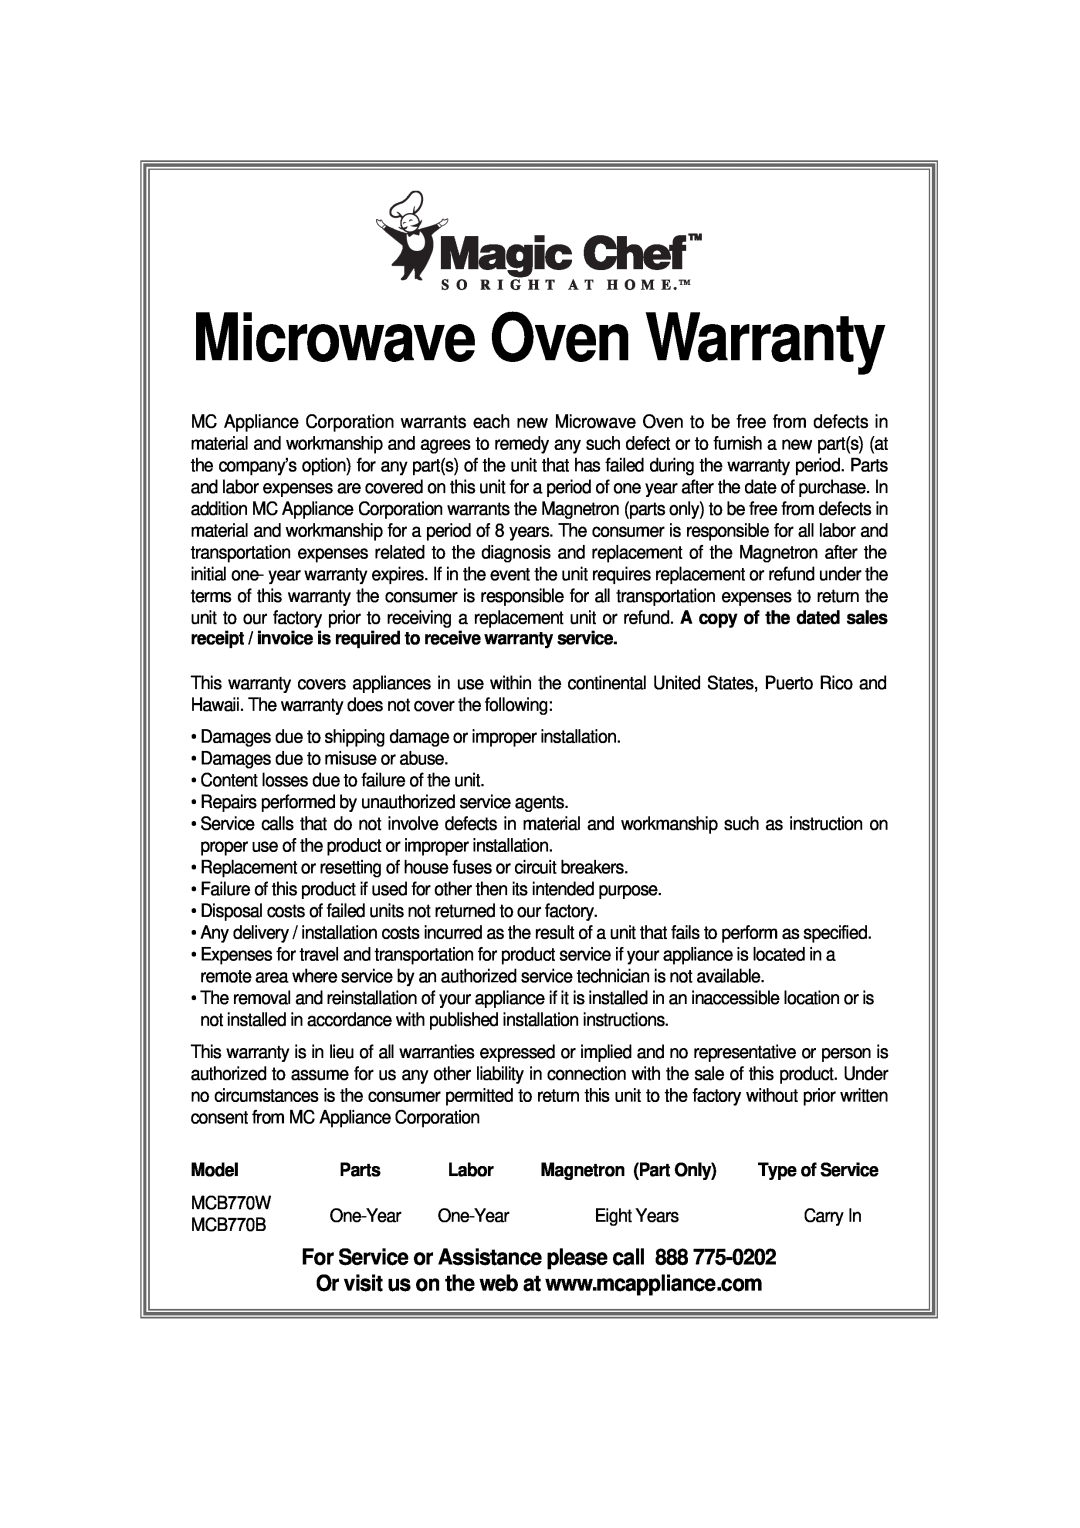 Magic Chef MCB770B instruction manual Microwave Oven Warranty, Model, Parts, Labor, Magnetron Part Only 